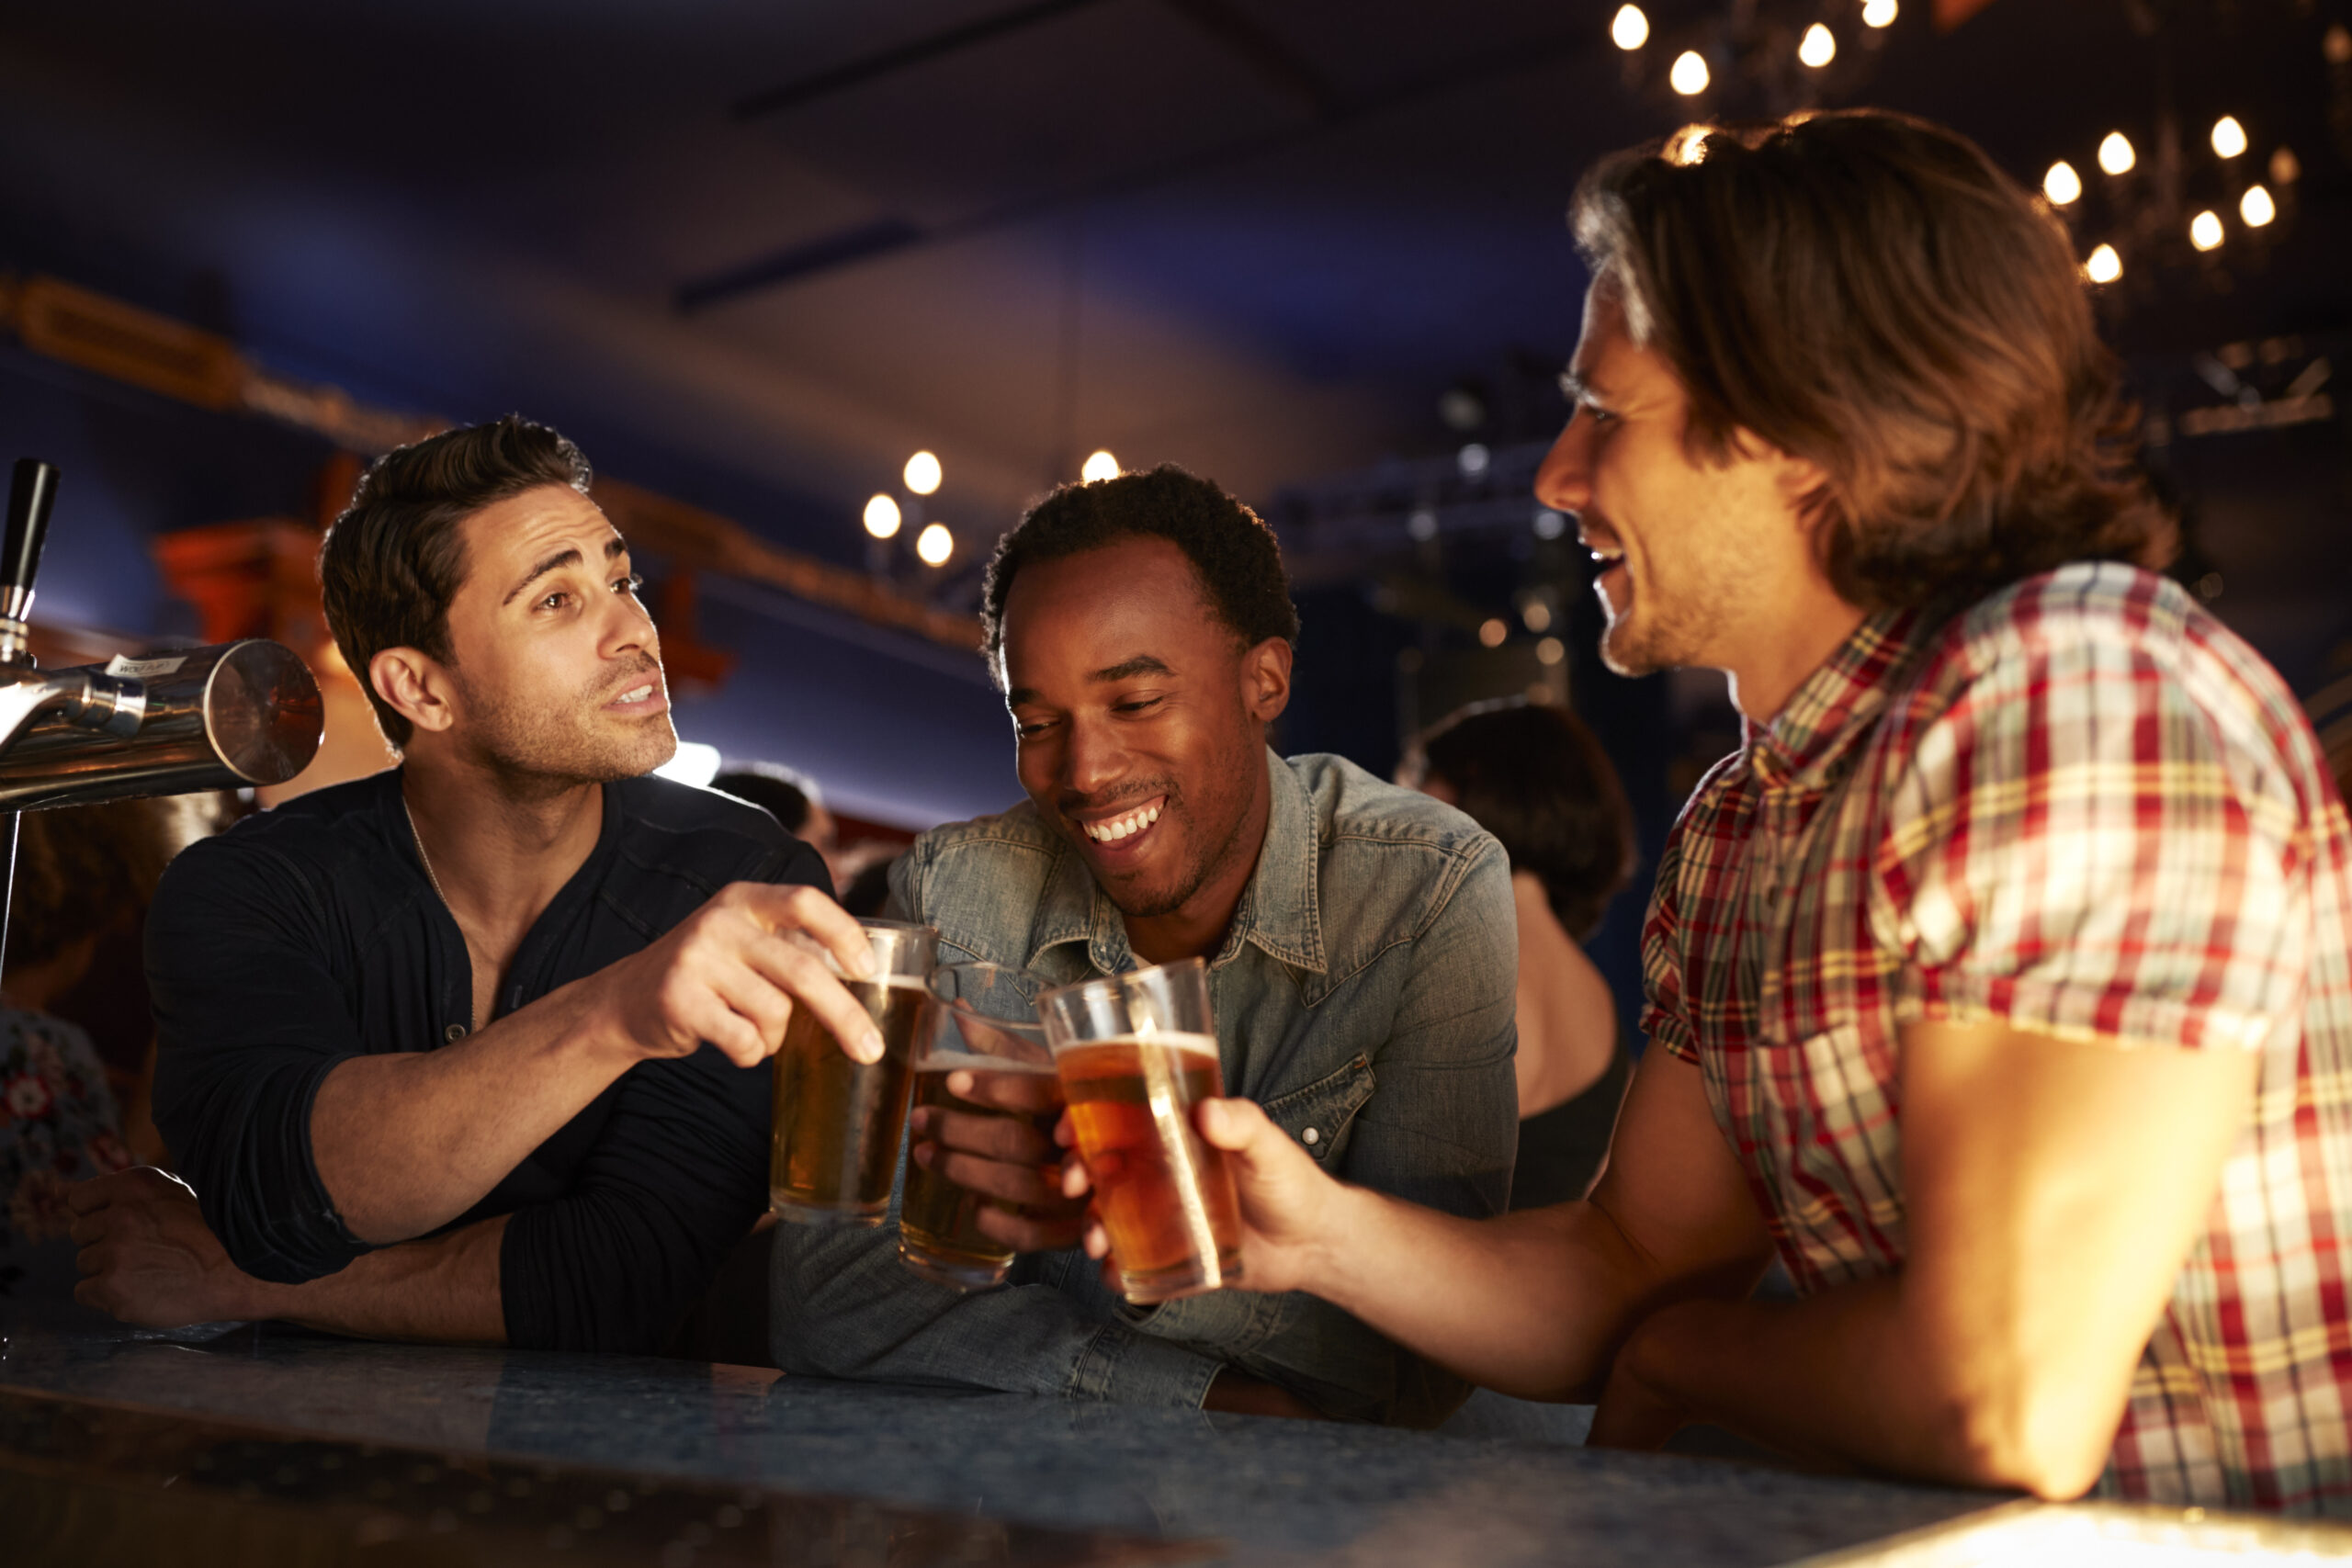 group of male friends in bar